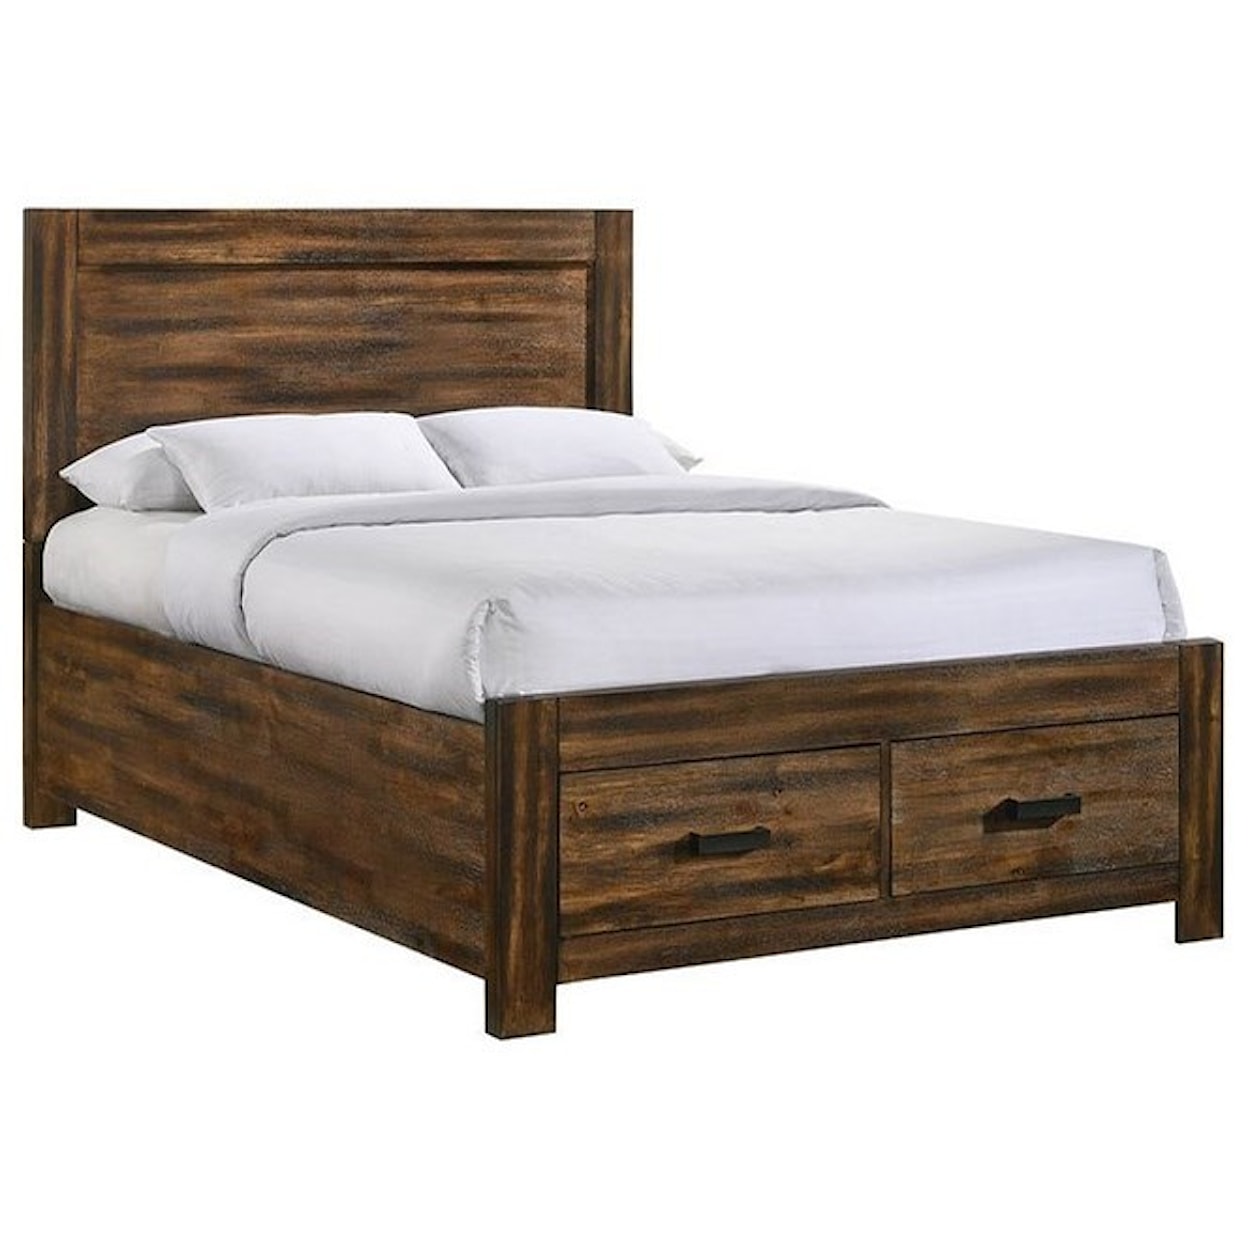 Elements International Warner Full Bed with 2 Storage Drawers